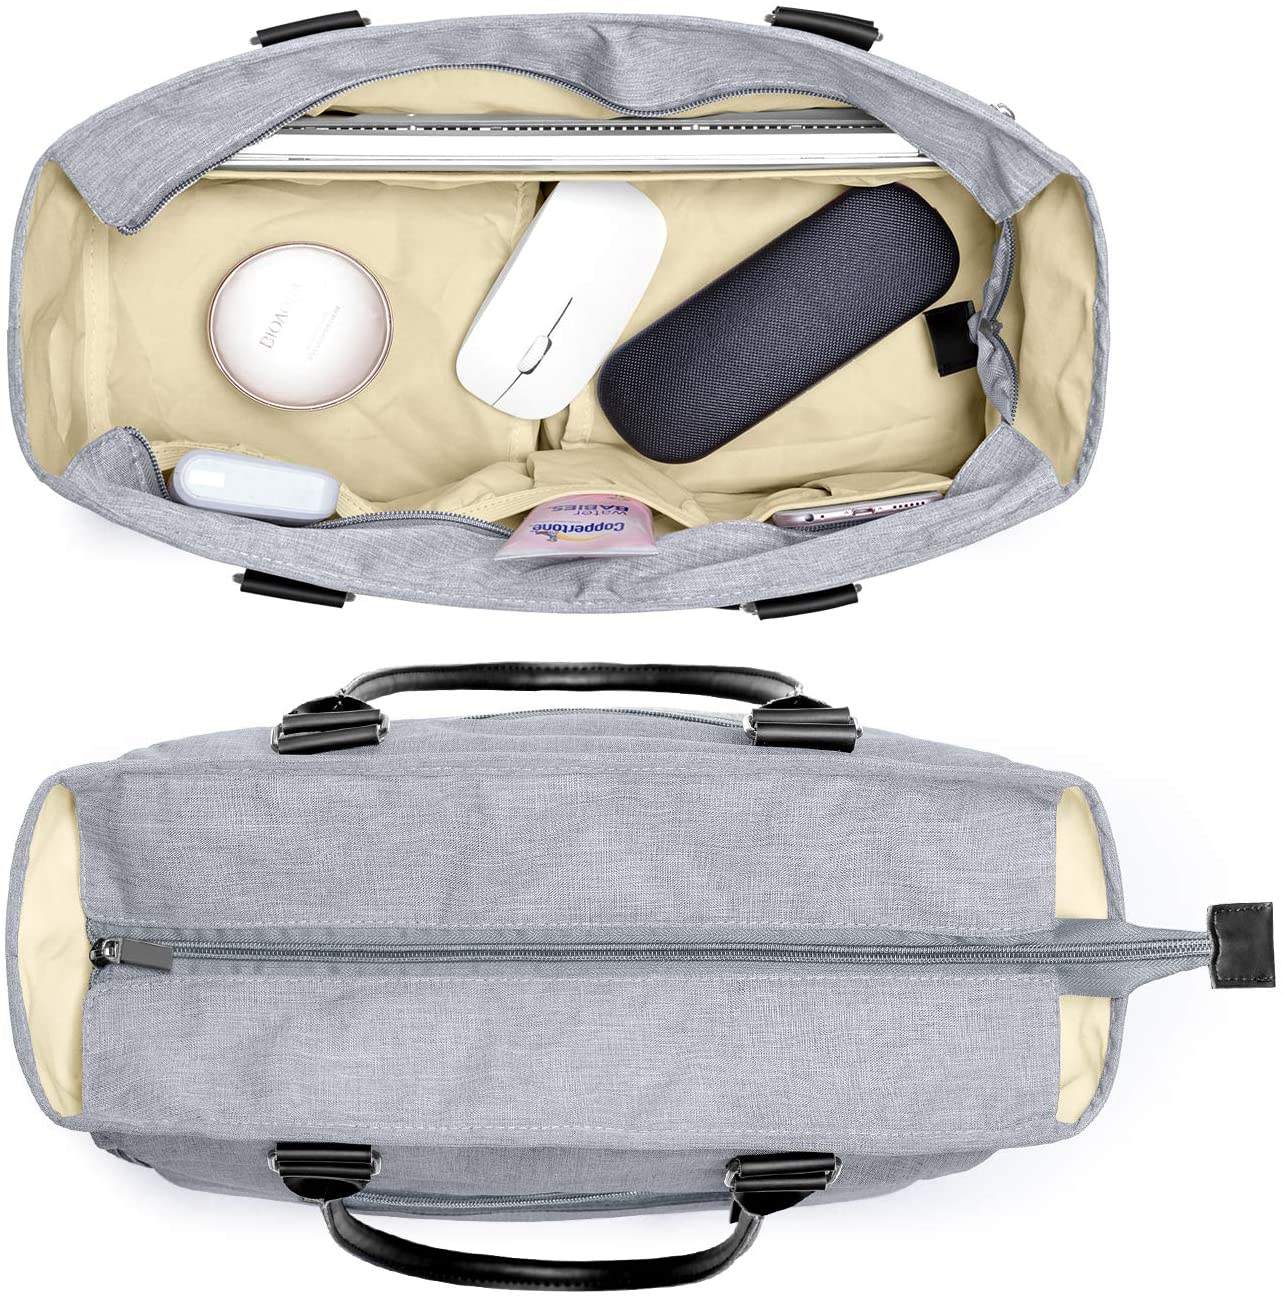 Breast Pump Bag Diaper Tote Bag with Laptop Sleeve Fit Most Breast Pumps like Spectra S1,S2, Evenflo